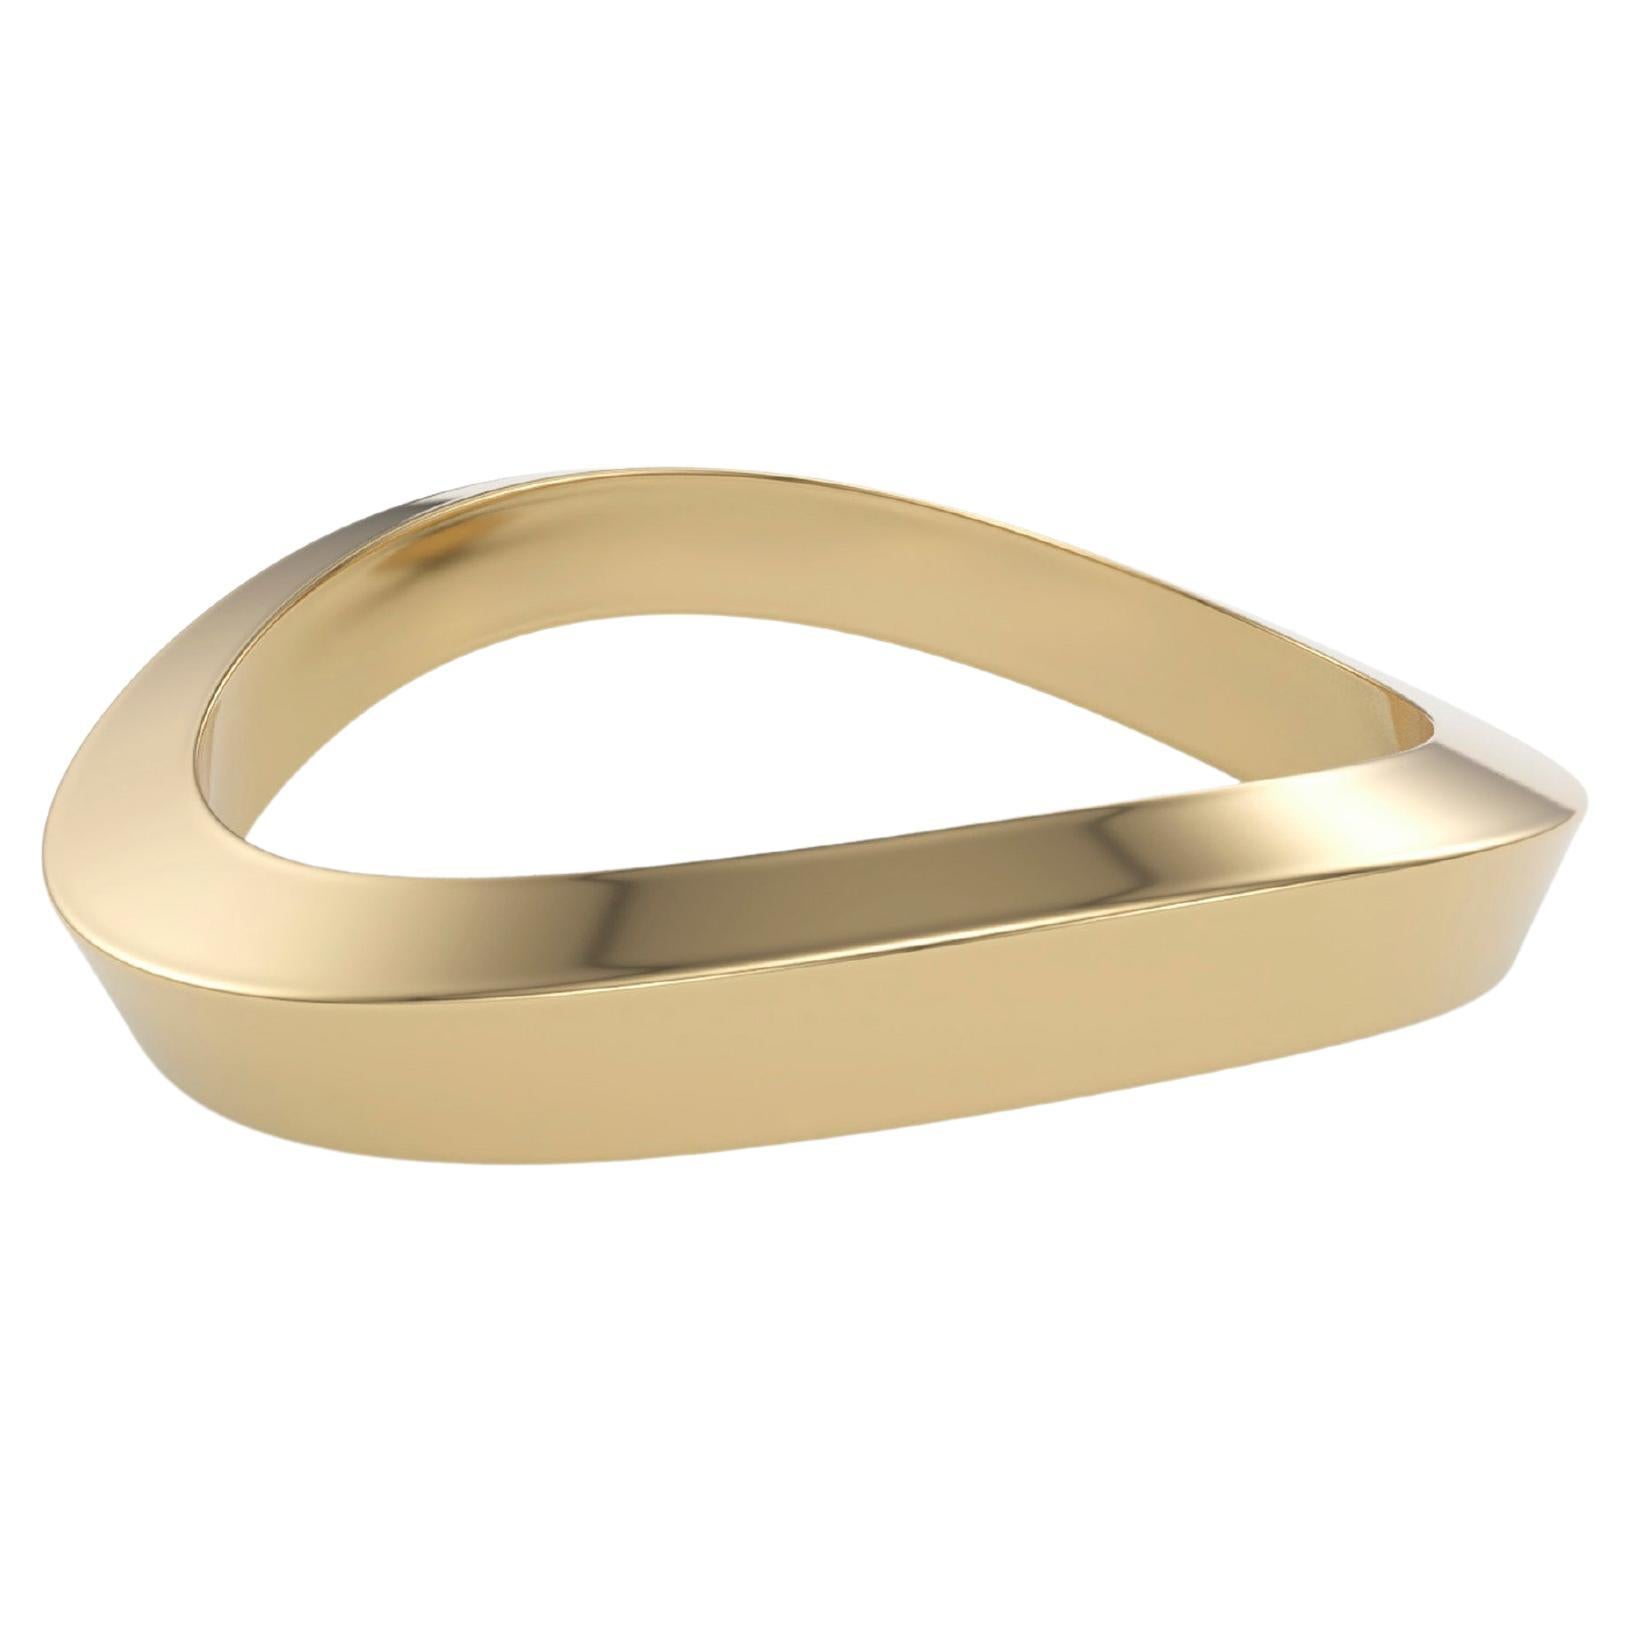 Casey Perez 18K Gold Band Stackable Ring-sz 7 For Sale